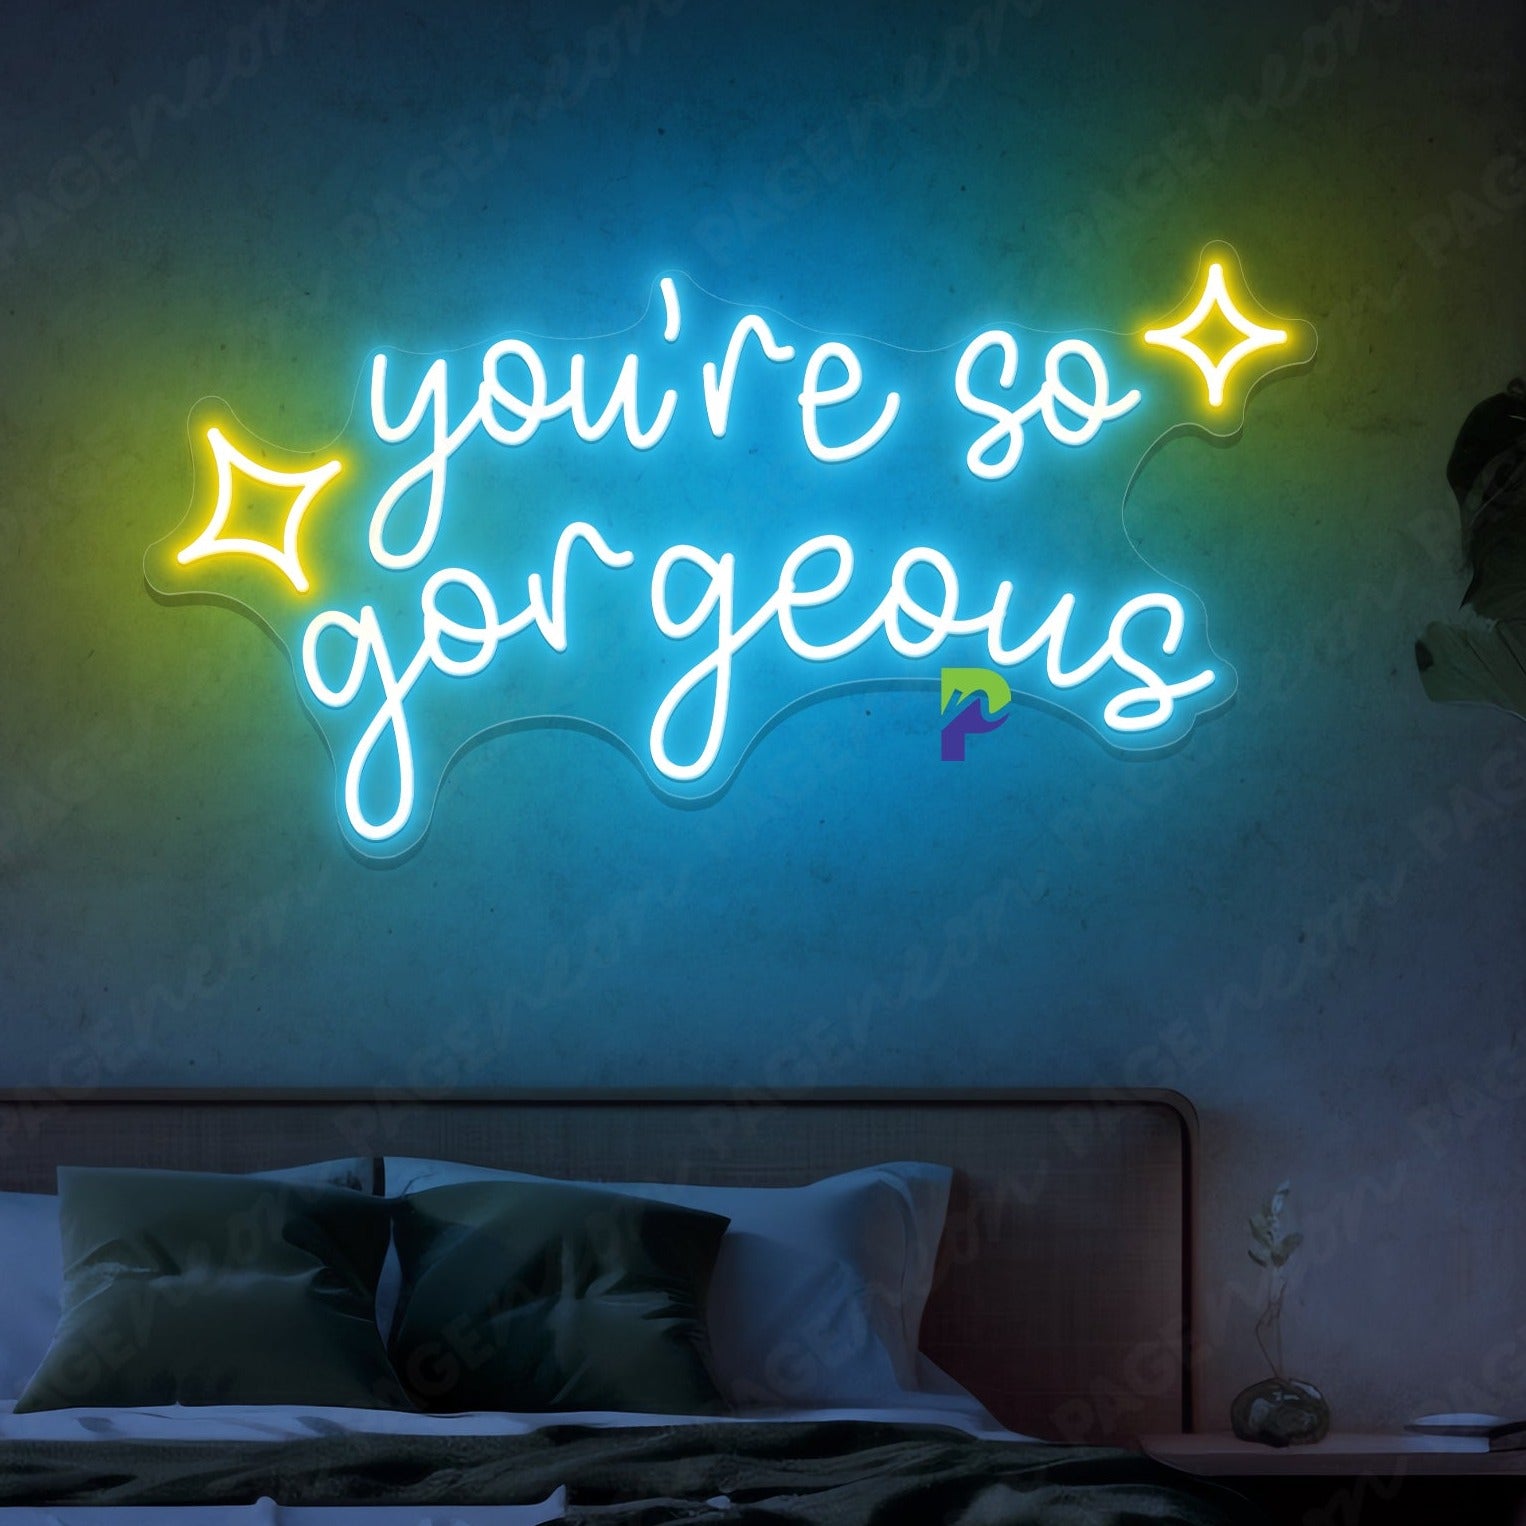 You're So Gorgeous Neon Sign Inspirational Led Light